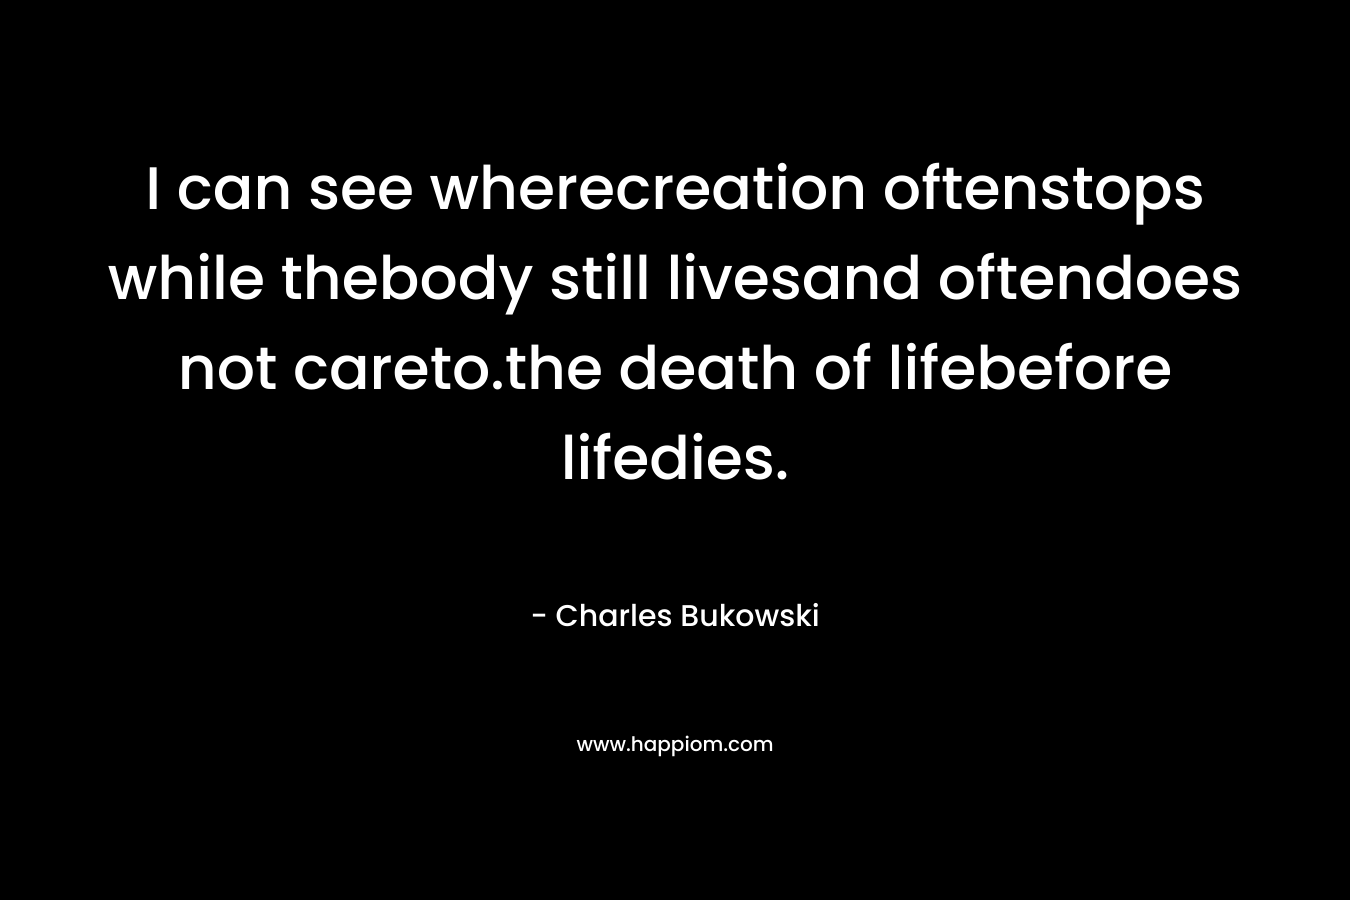 I can see wherecreation oftenstops while thebody still livesand oftendoes not careto.the death of lifebefore lifedies. – Charles Bukowski